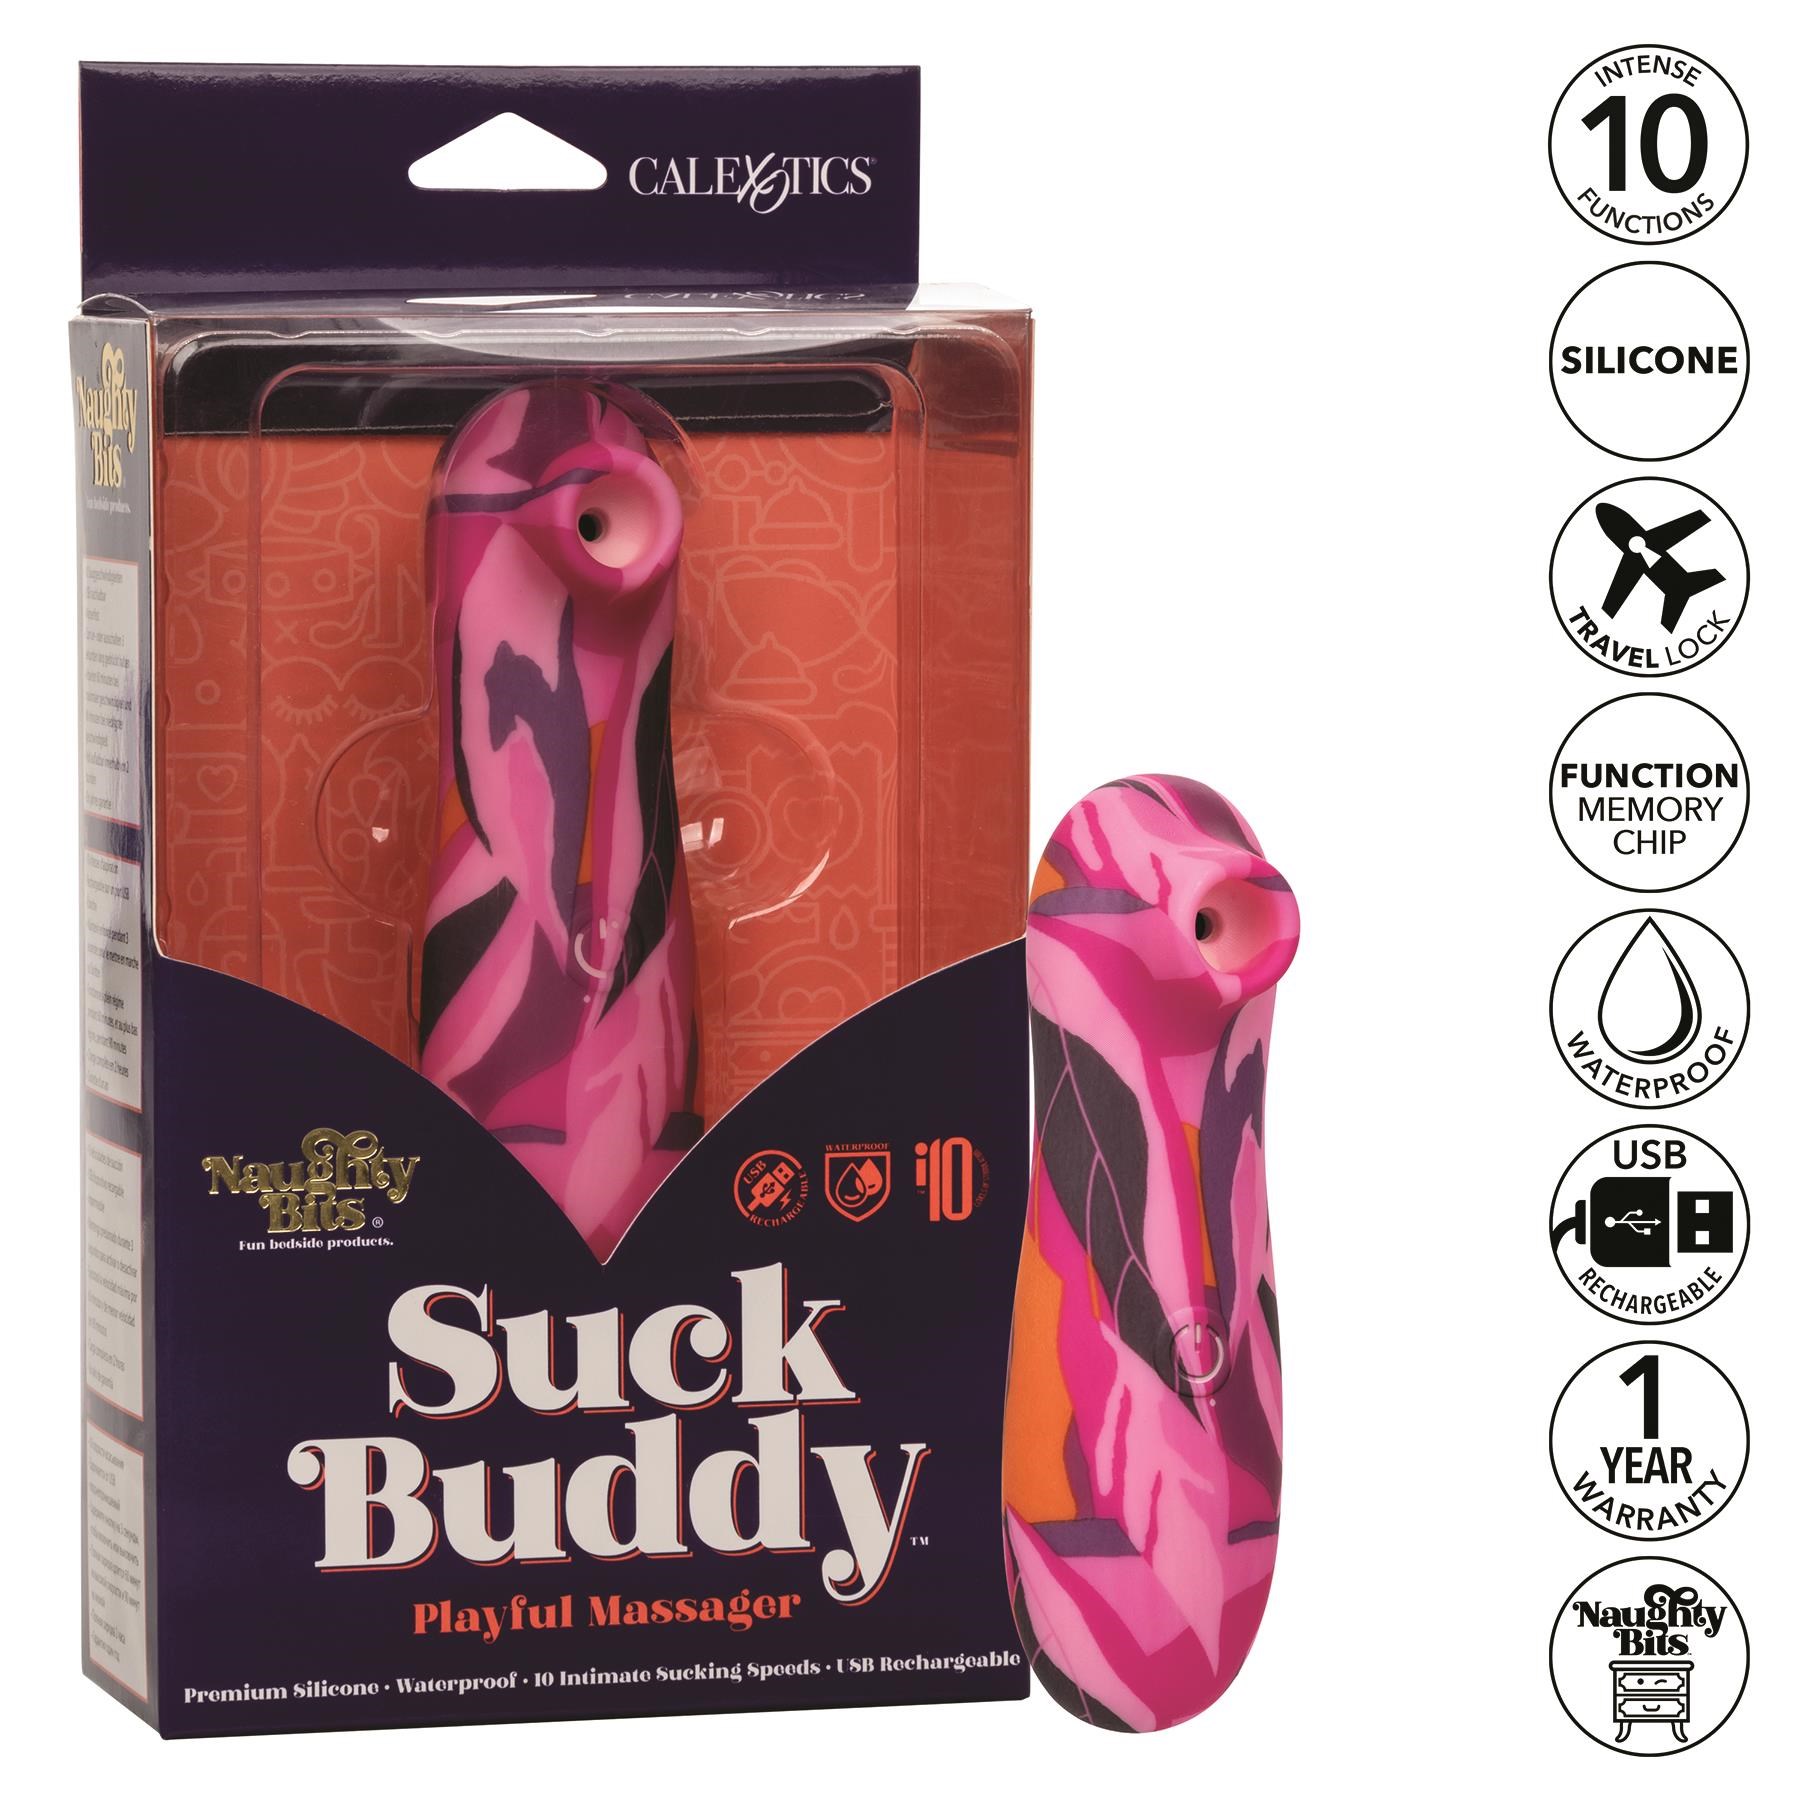 Naughty Bits Suck Buddy Playful Clitoral Stimulator - Features